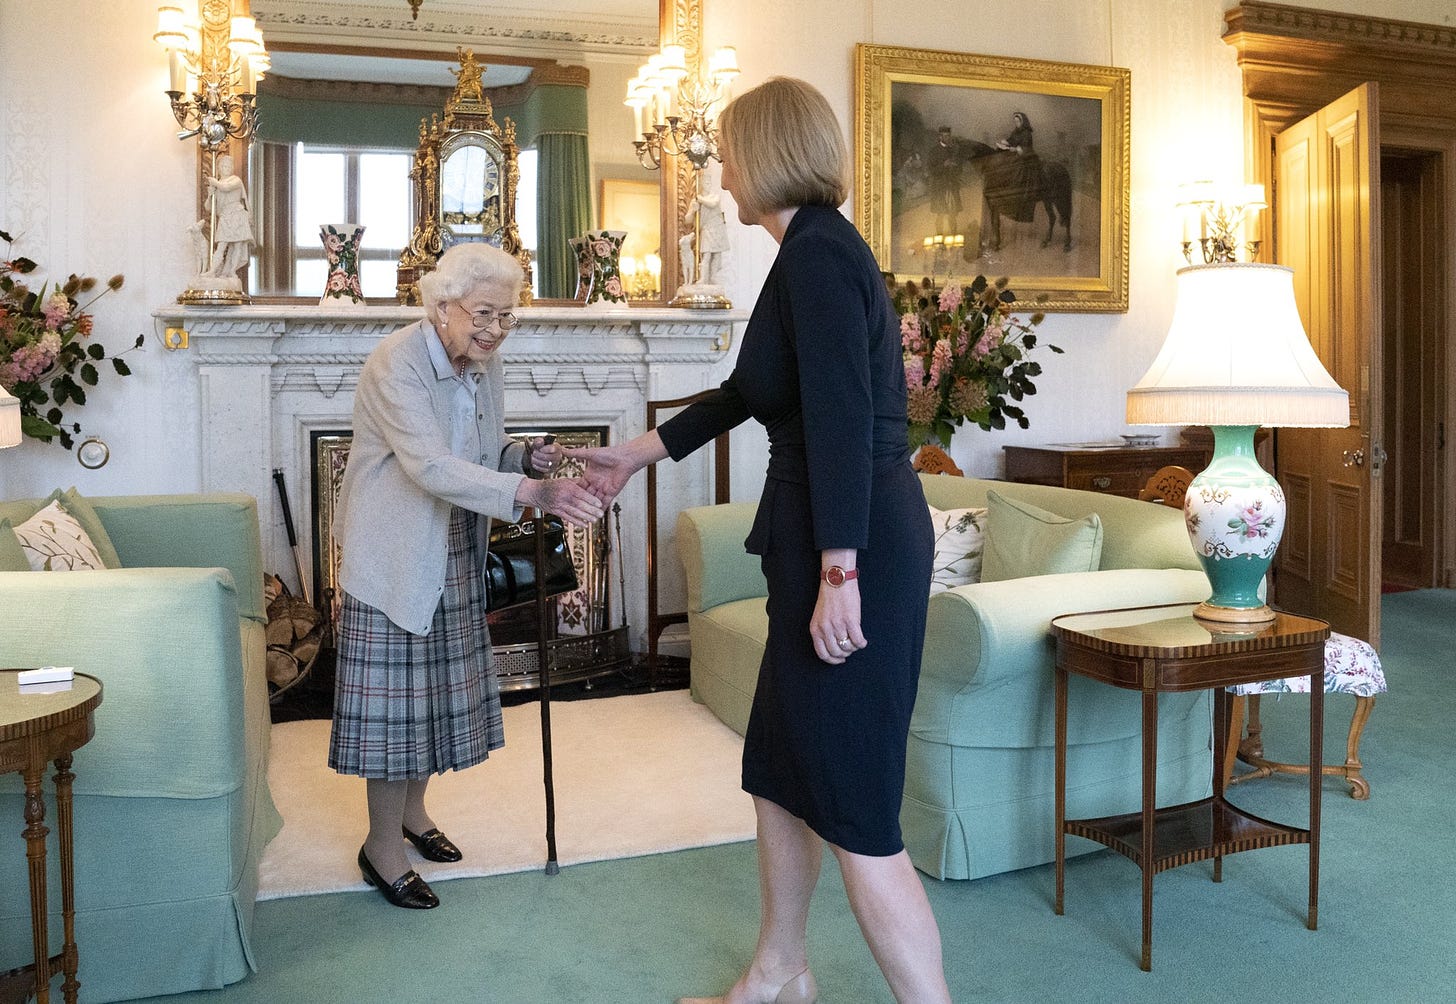 Queen Elizabeth II appointing Liz Truss as the UK's prime minister (Image: Twitter/@RoyalFamily)